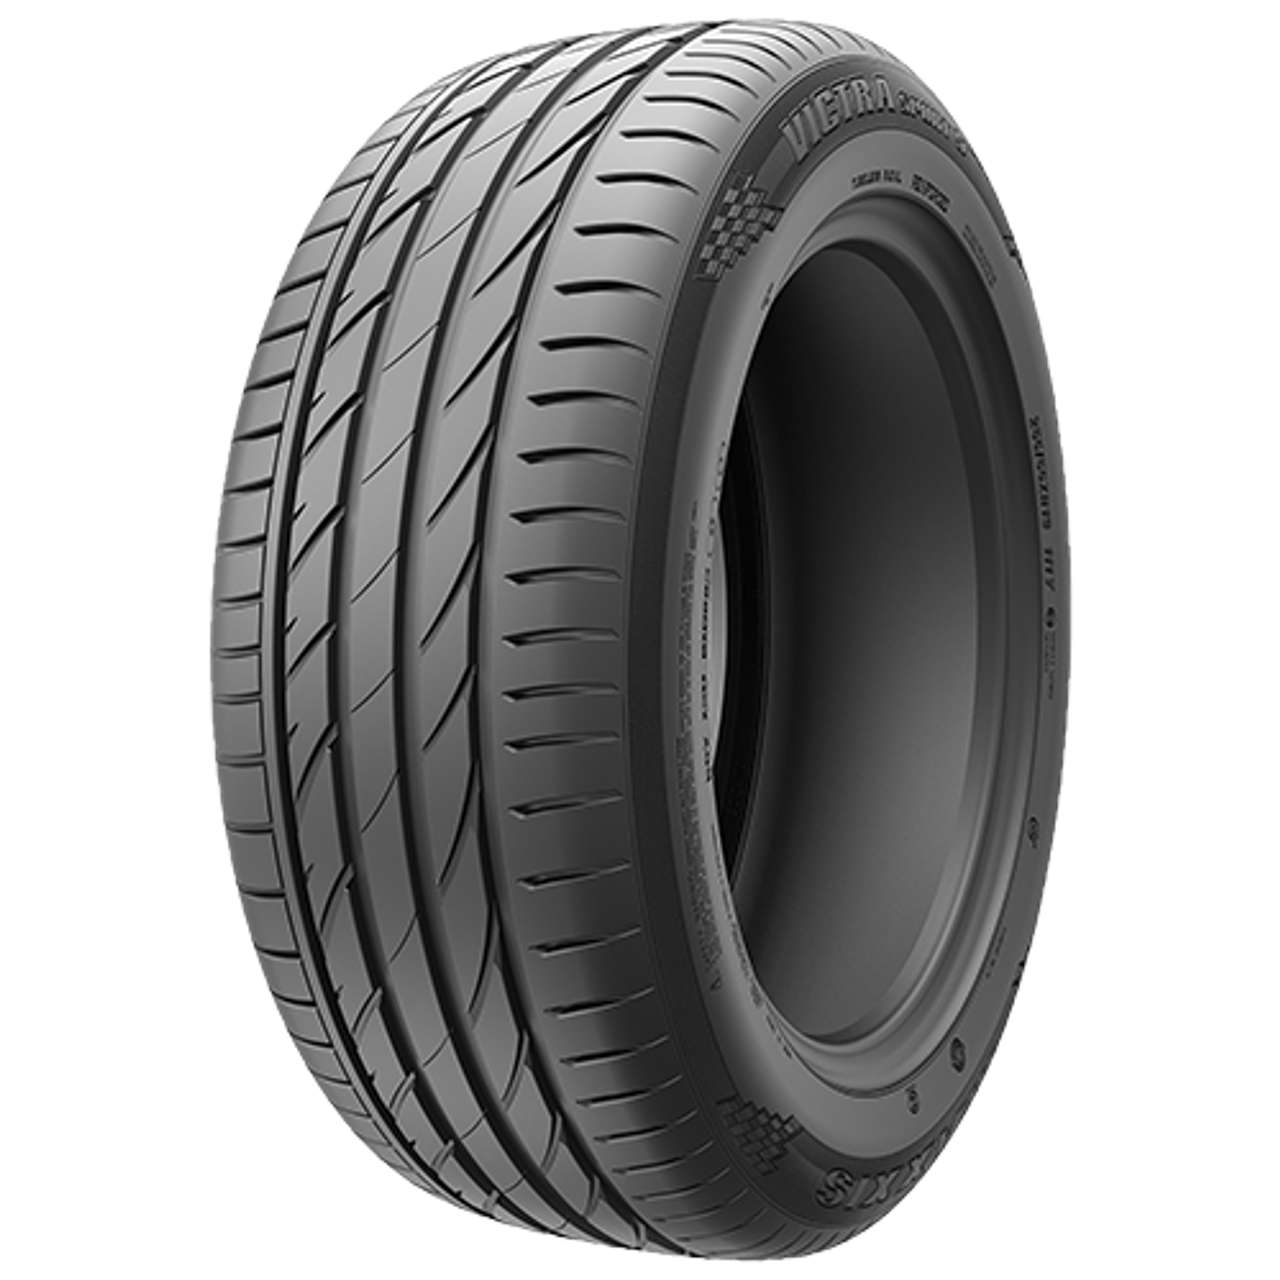 MAXXIS VICTRA SPORT 5 (VS5) 255/40ZR20 101Y MFS BSW